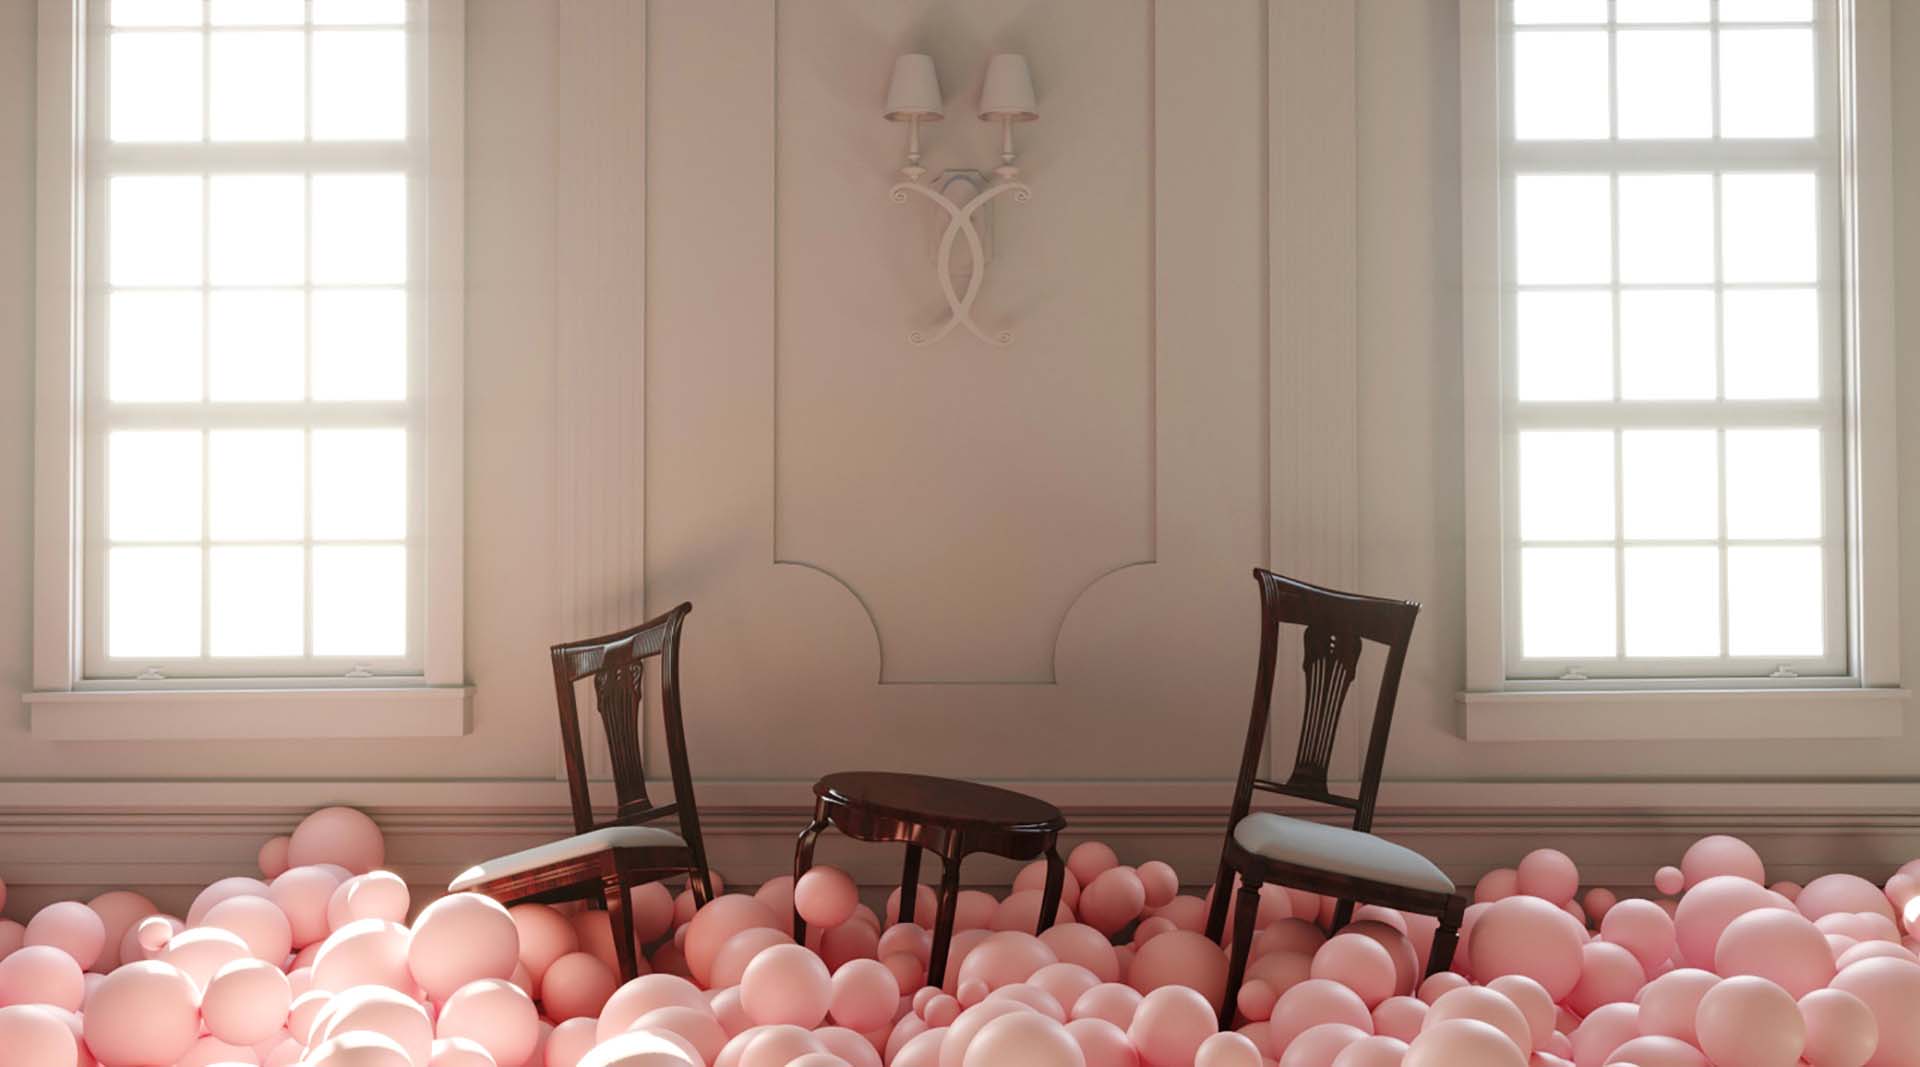 design-motion-3d-photography-octane-redshift-corona-art-visual-animation-render-style-graphic-piano-music-beauty-digital-balloon-art-chair-interior-pink